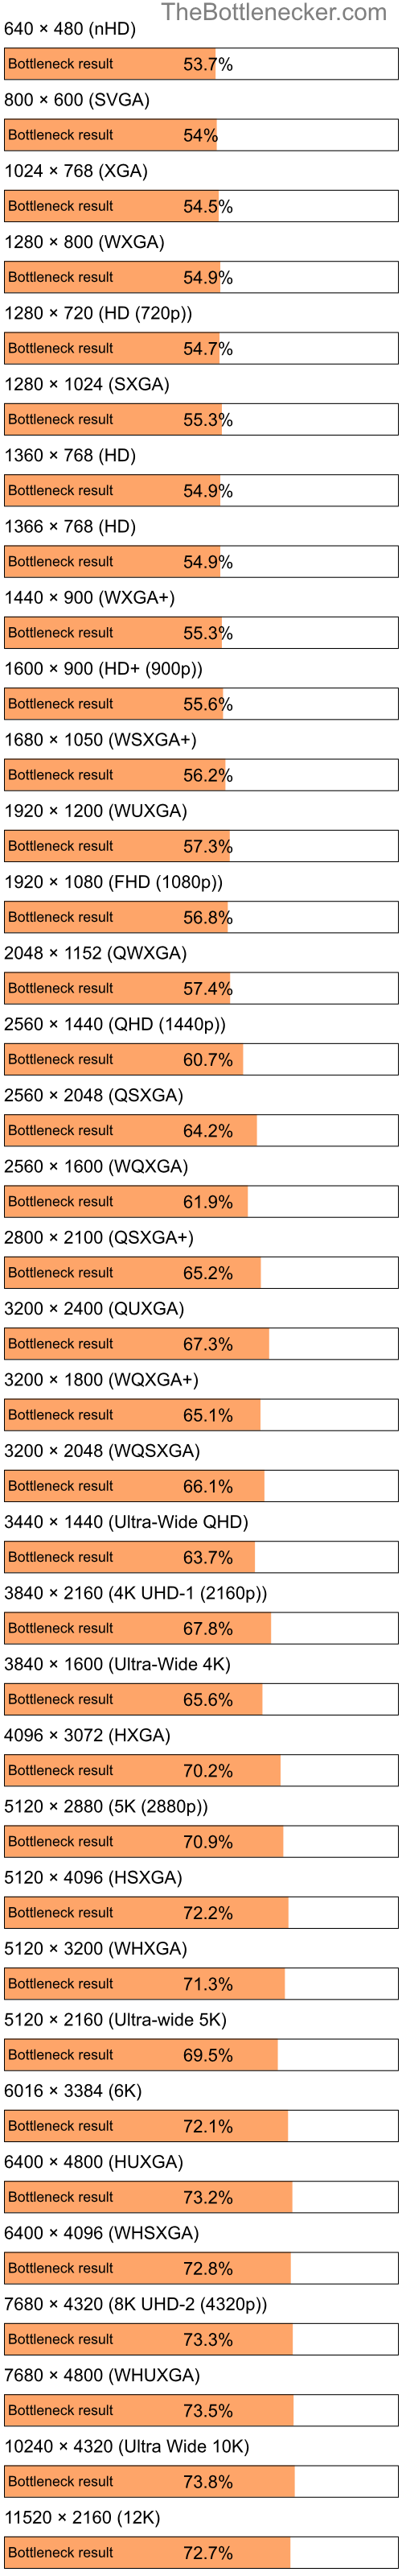 Bottleneck results by resolution for Intel Celeron M and NVIDIA Quadro NVS 295 in Processor Intense Tasks